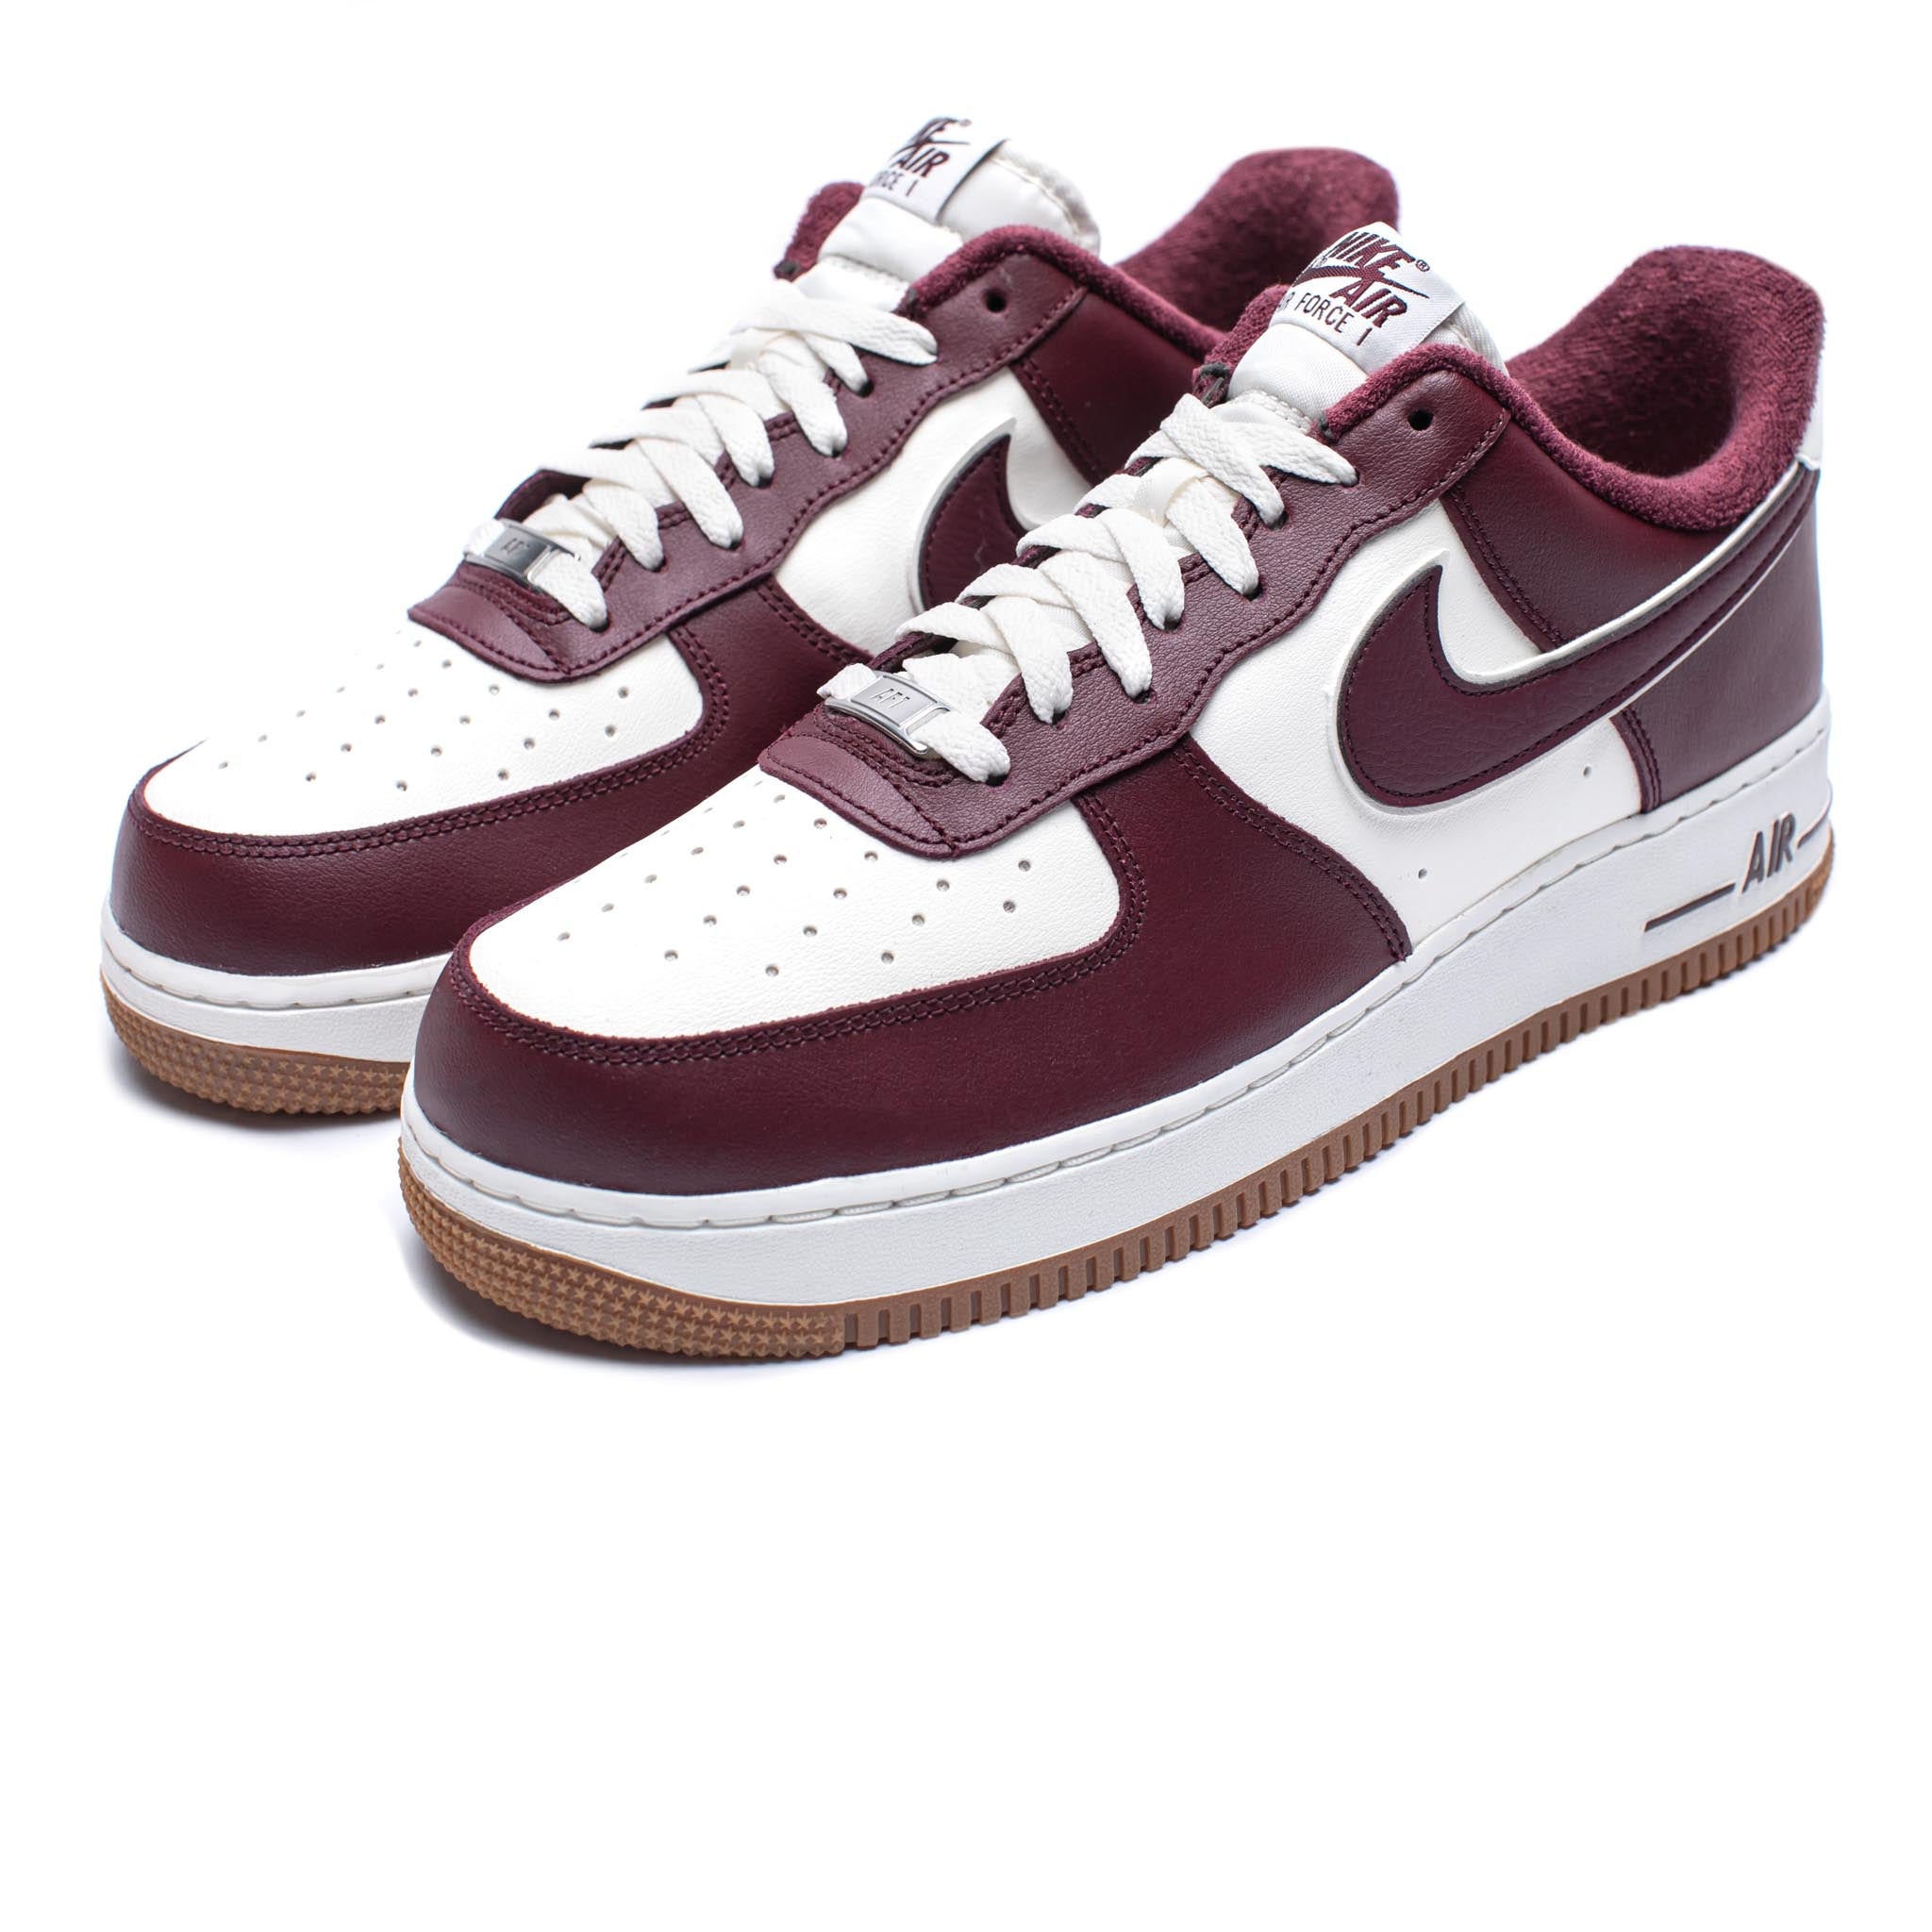 Mens Size 10.5 Nike Air Force 1 07 LV8 College Pack Sail Maroon